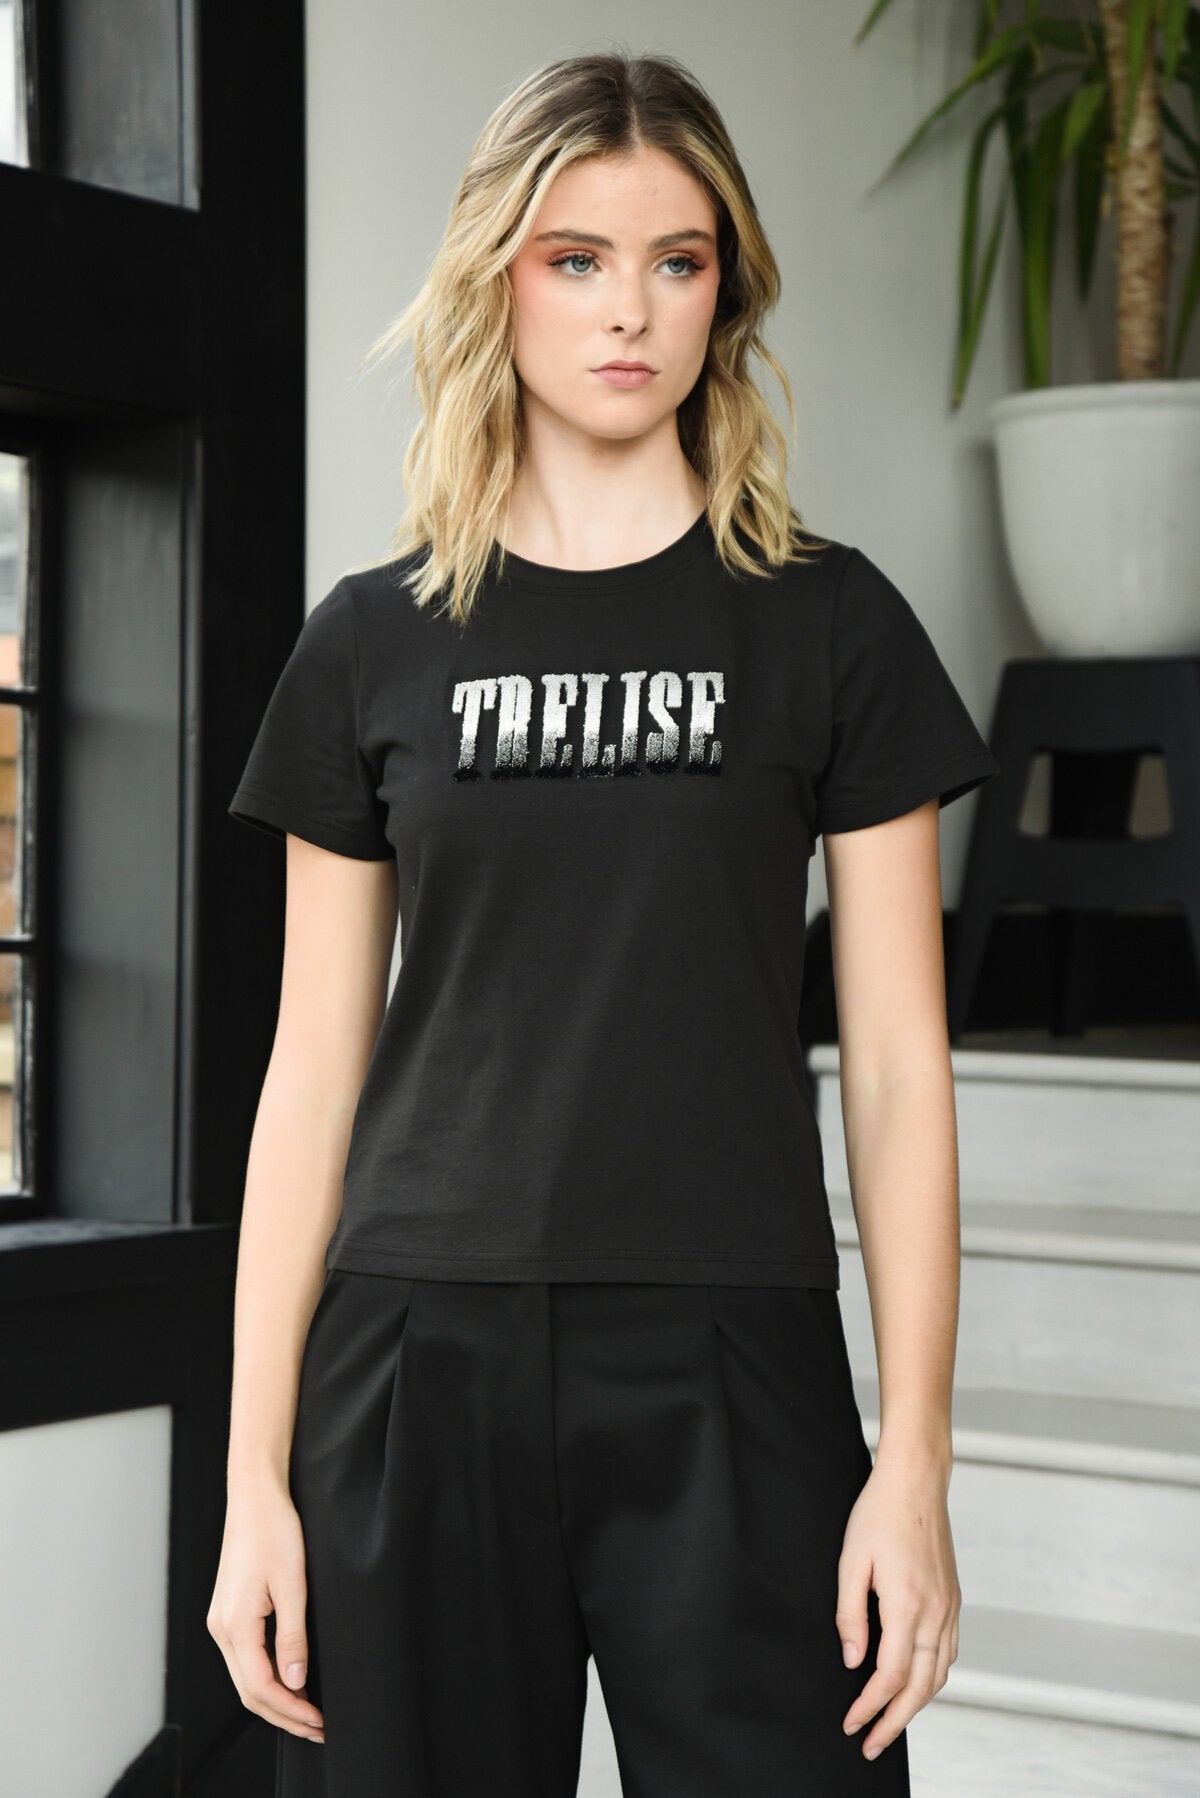 Trelise Cooper - This Must Tee Love T-Shirt